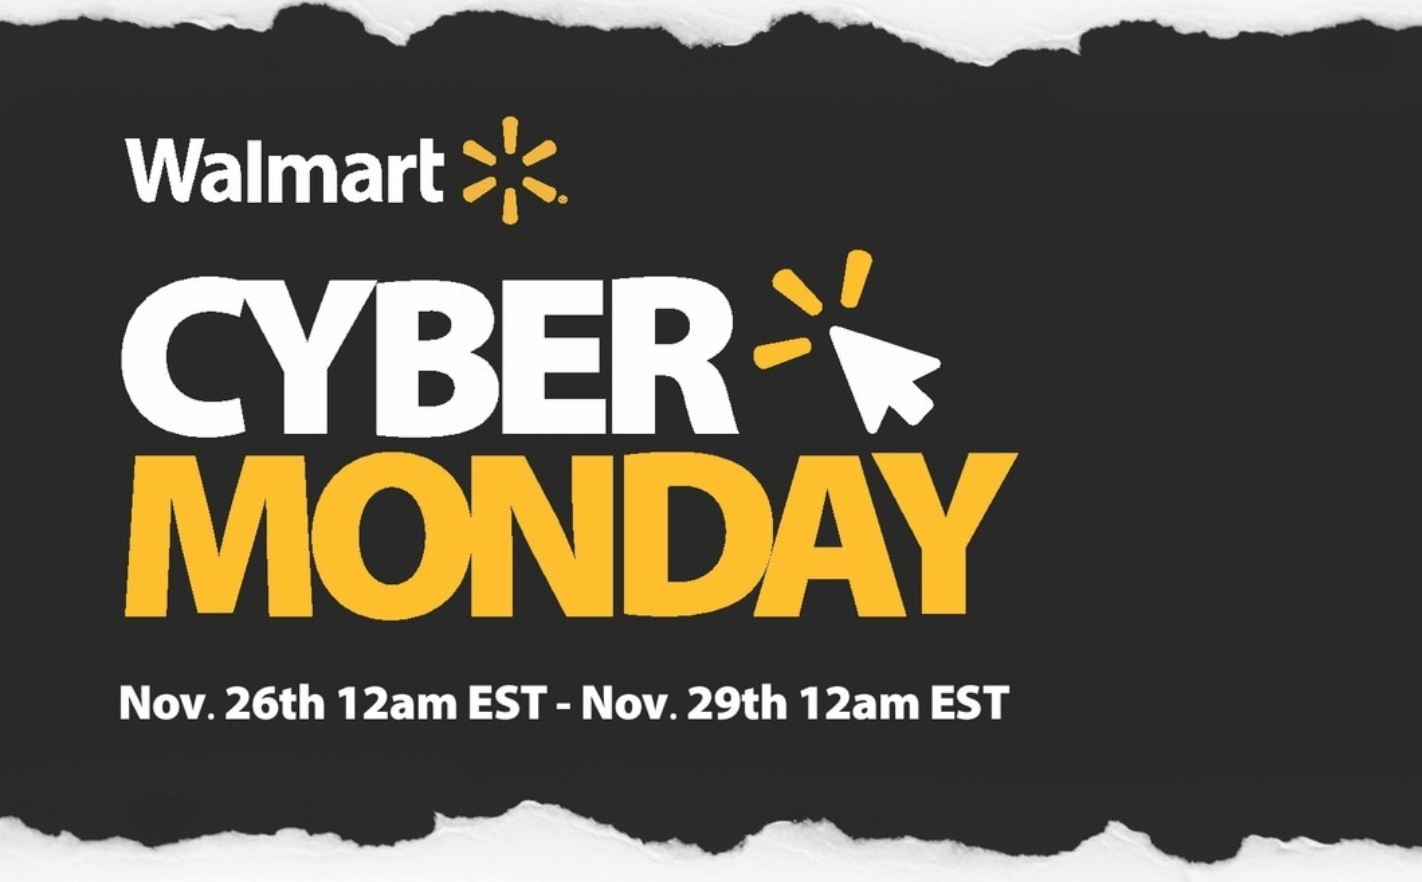 Walmart Canada Cyber Monday 2018 Flyer Released Canadian Freebies Coupons Deals Bargains Flyers Contests Canada